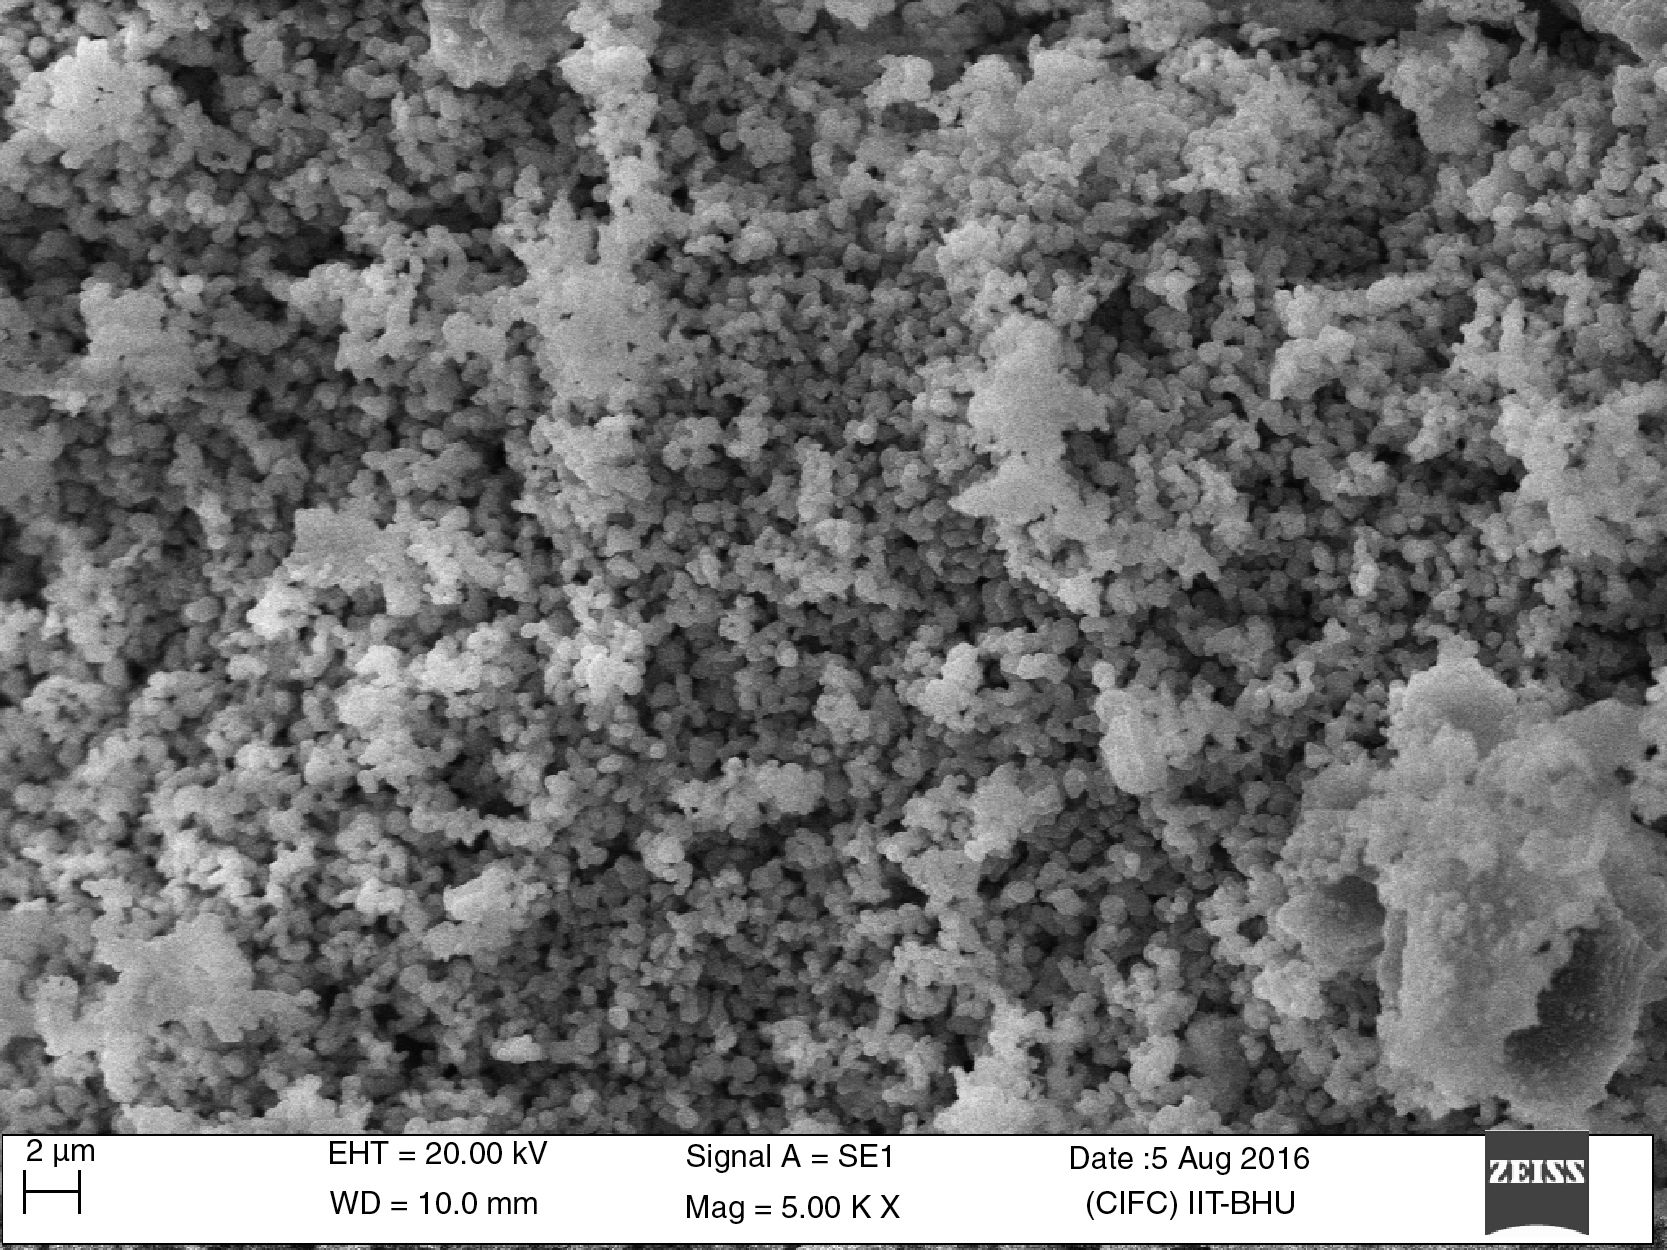 shows SEM micrographs of the surfaces of the silica gel as a function